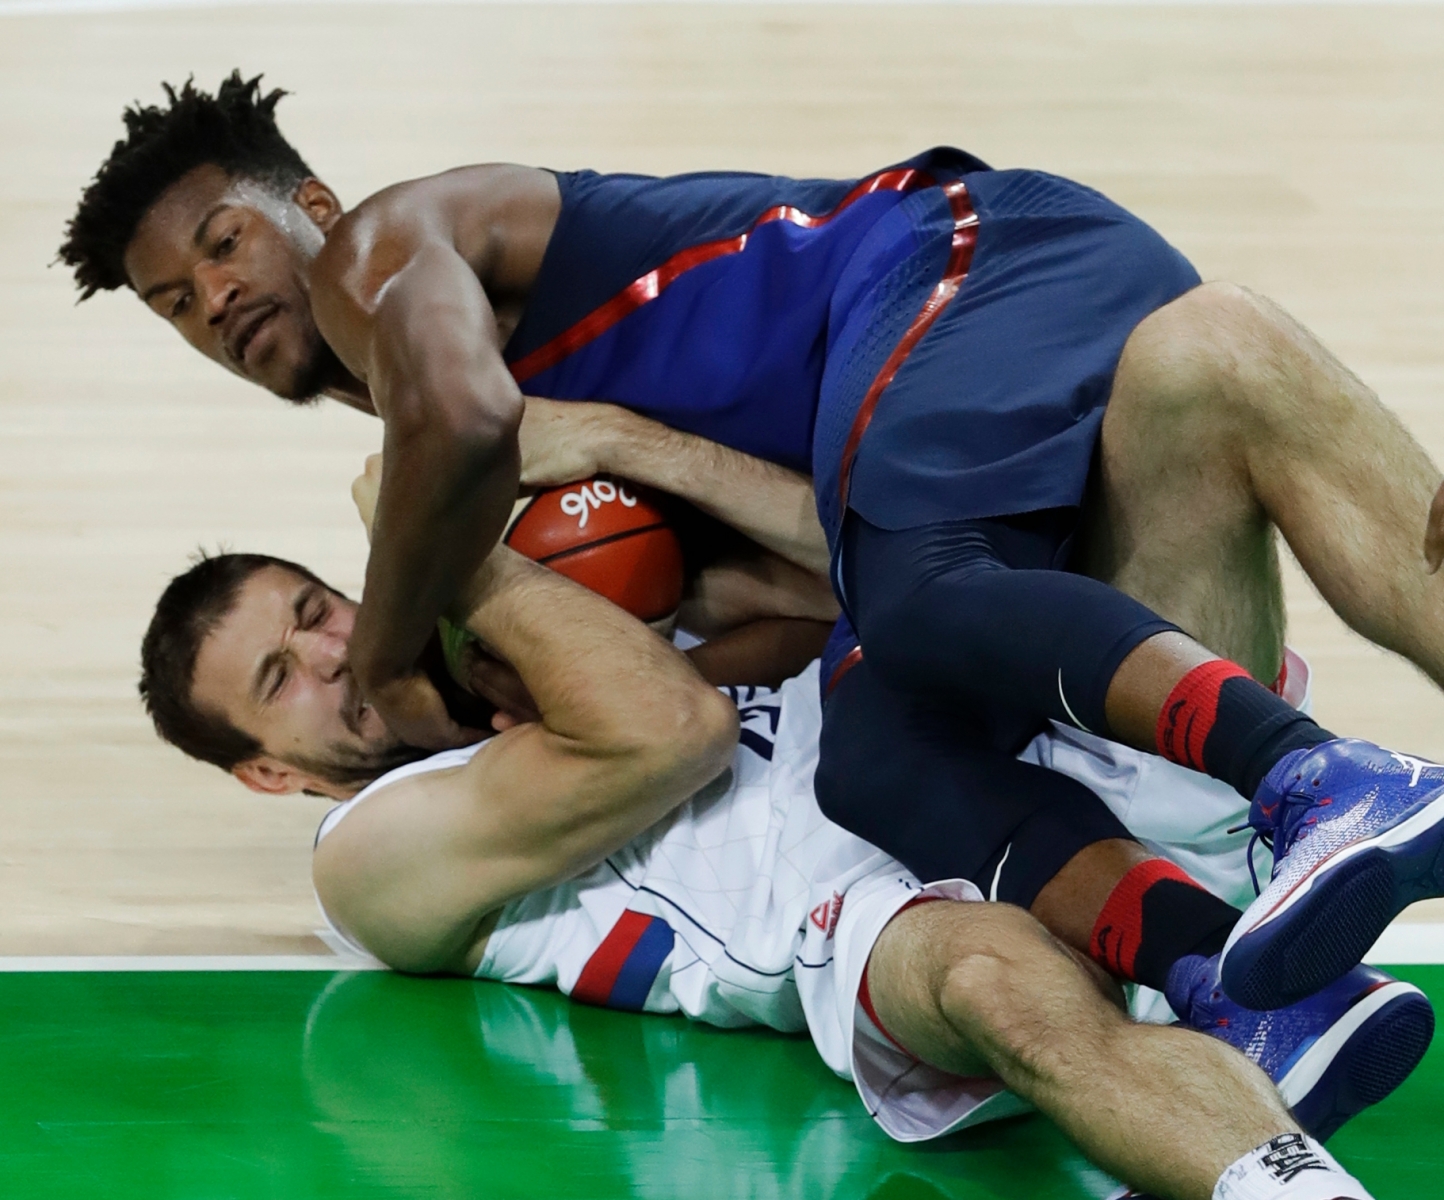 Serbia's Stefan Bircevic, bottom, and United States' Jimmy Butler battle for the ball during the men's gold medal basketball game at the 2016 Summer Olympics in Rio de Janeiro, Brazil, Sunday, Aug. 21, 2016. (AP Photo/Charlie Neibergall) Rio Olympics Basketball Men